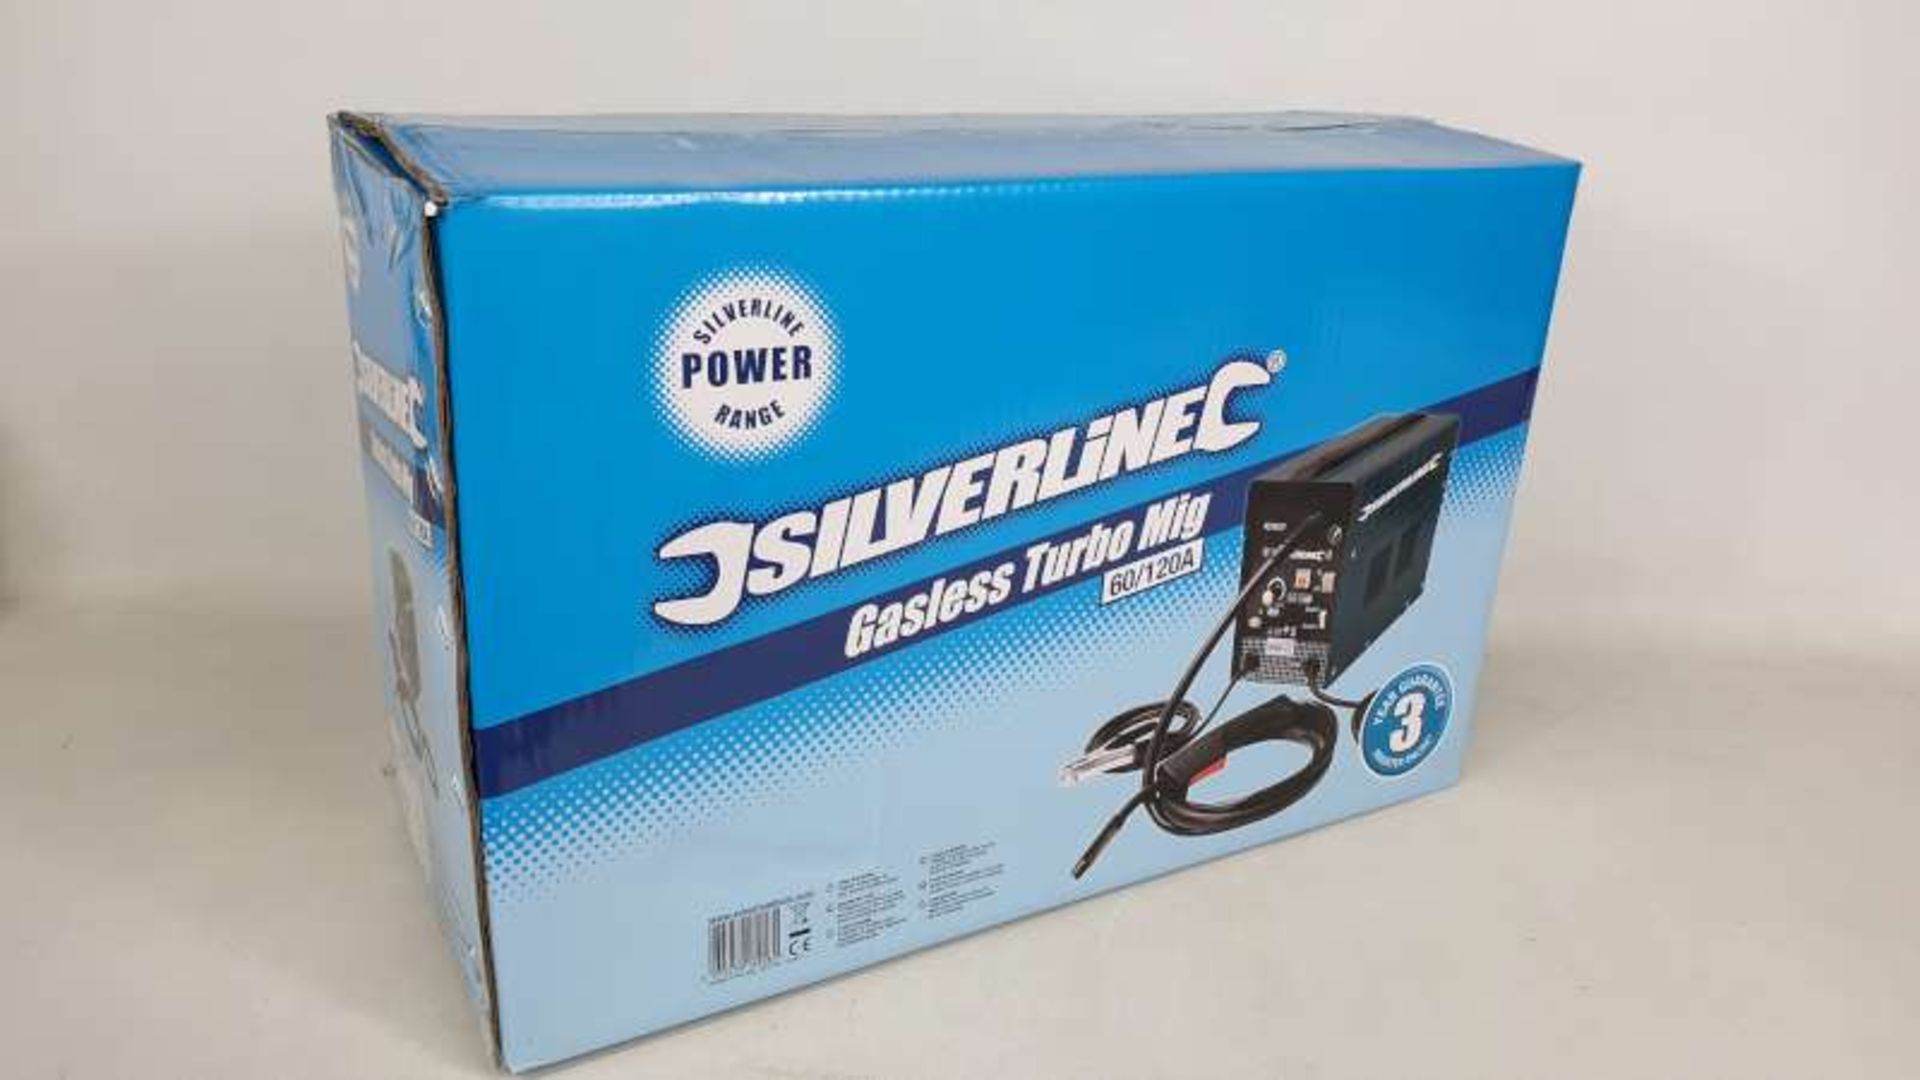 BRAND NEW BOXED SILVERLINE GASLESS TURBO MIG WELDER 60/120A WITH 3 YEARS MANUFACTURERS GUARANTEE